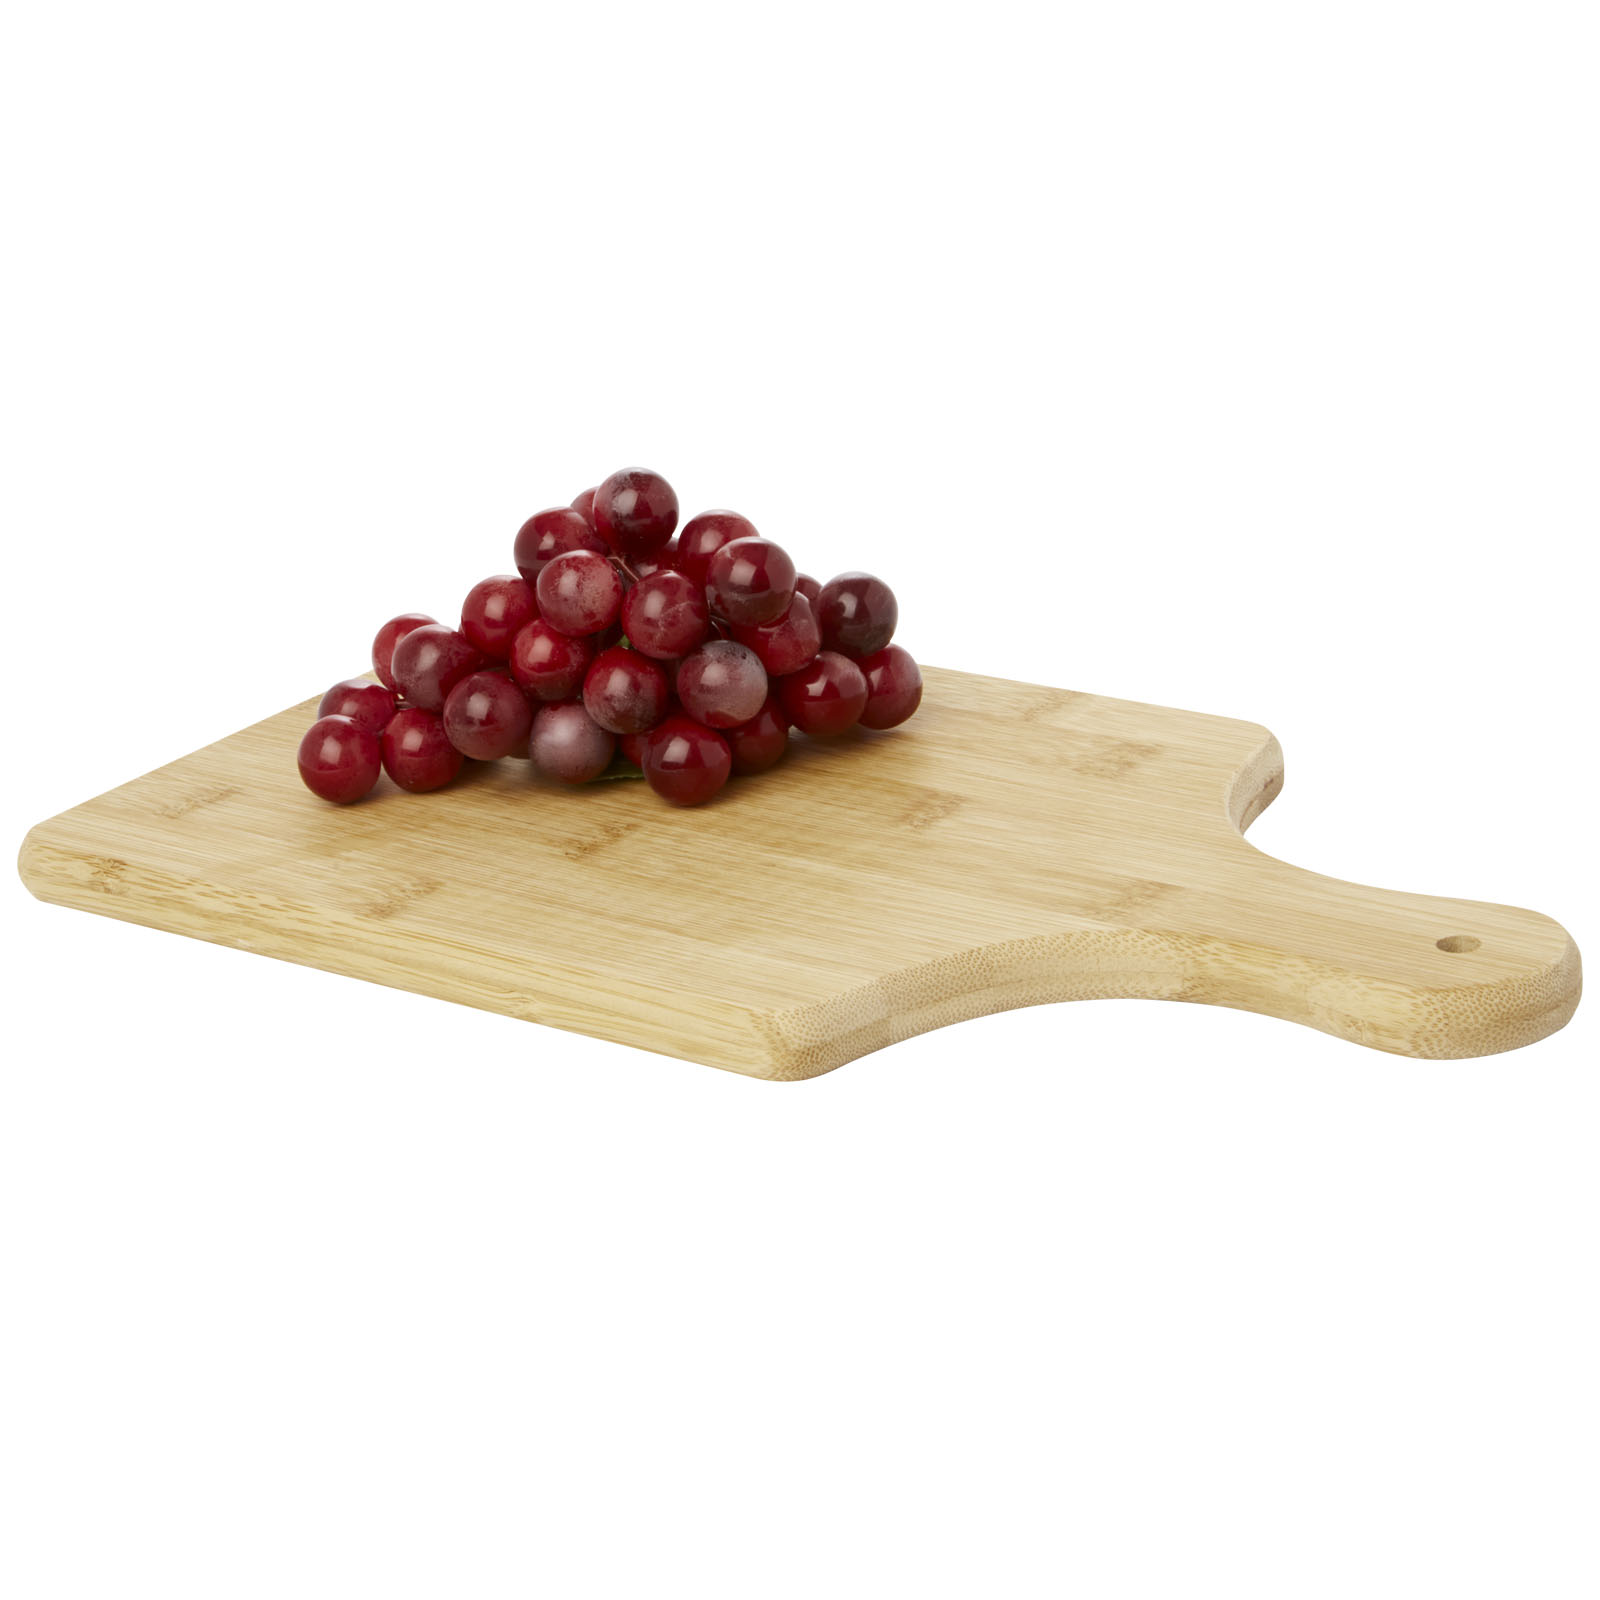 Home & Kitchen - Quimet bamboo cutting board